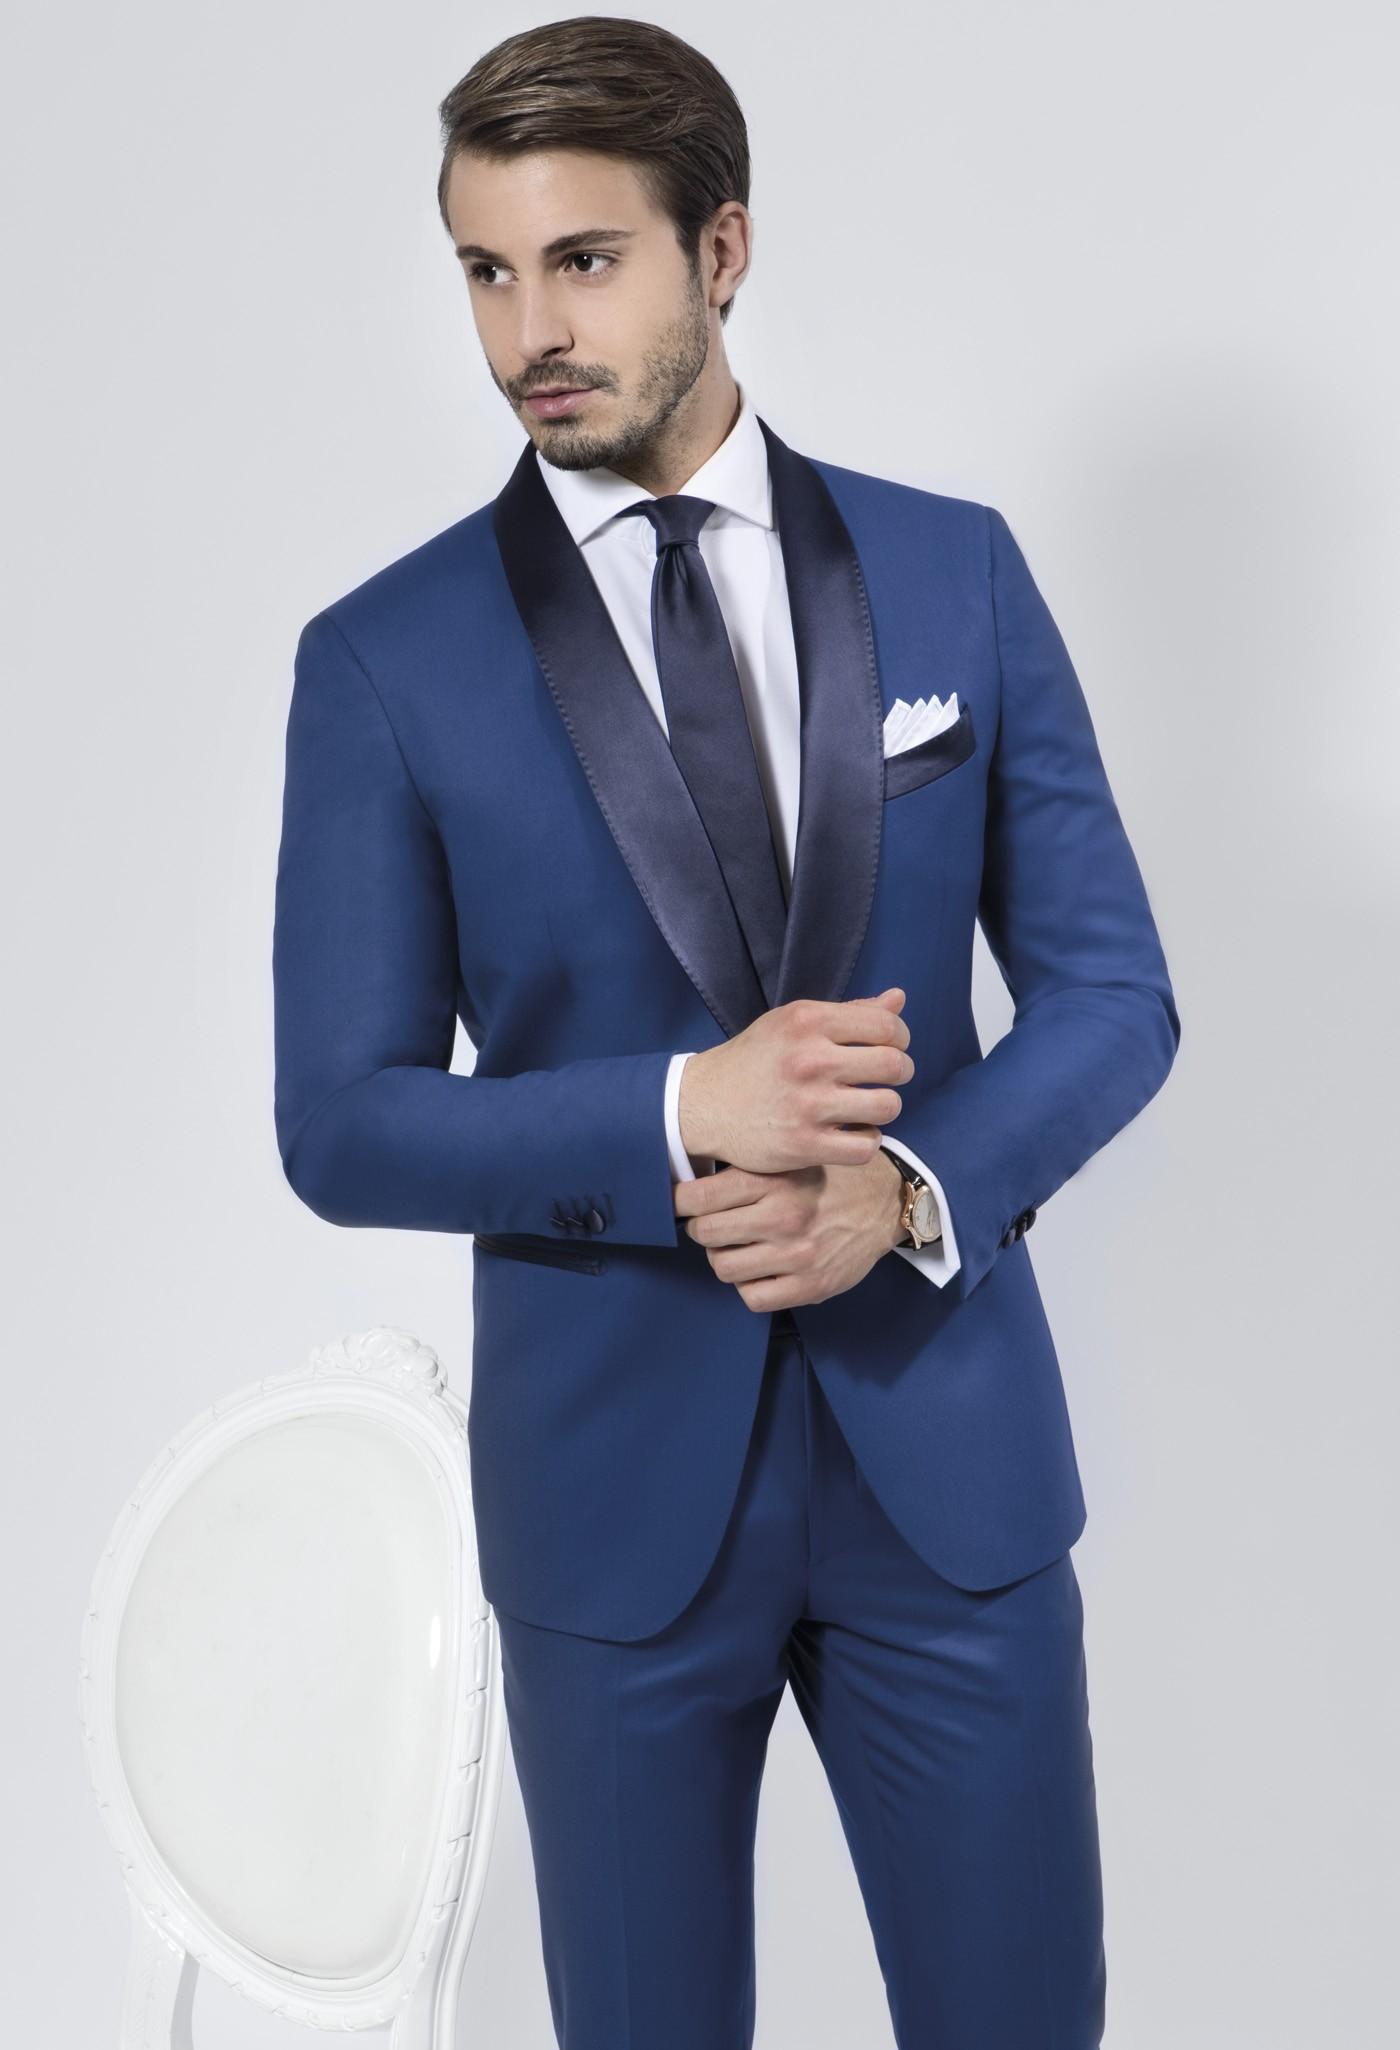 Suit for Men Styles – Some of The Best – careyfashion.com